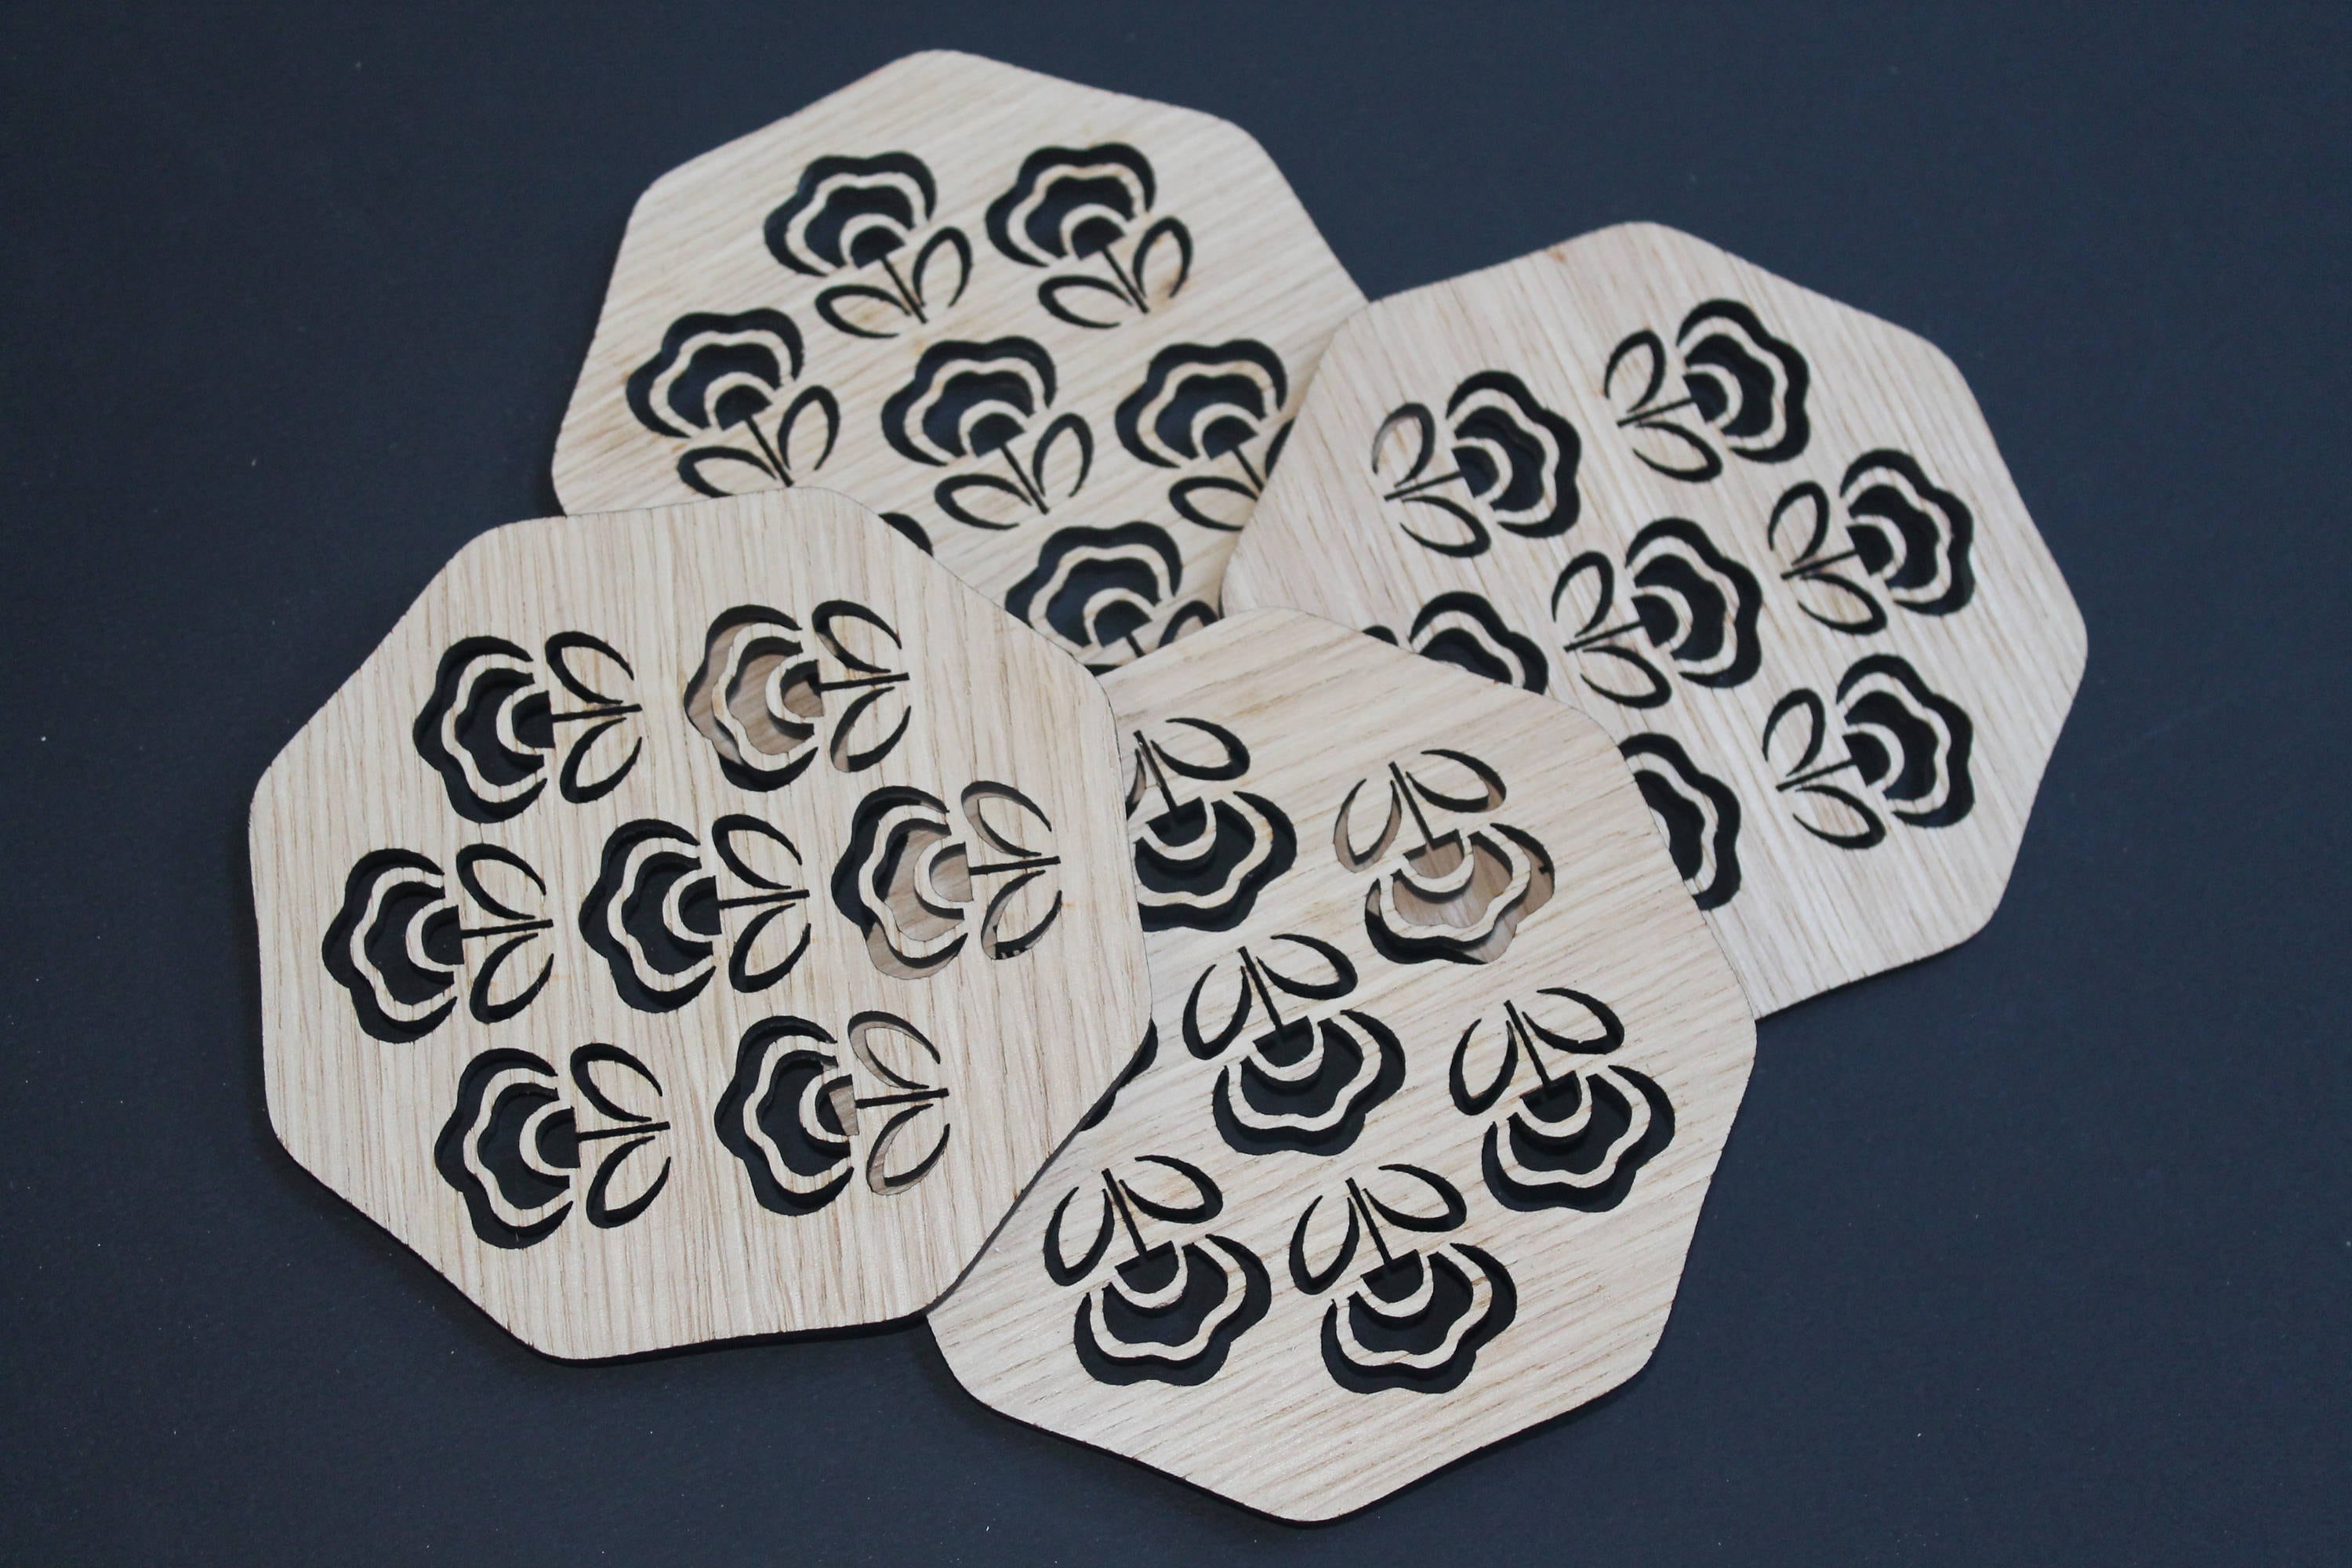 70s Flower Style Coasters Laser Cut Coasters Set of 4